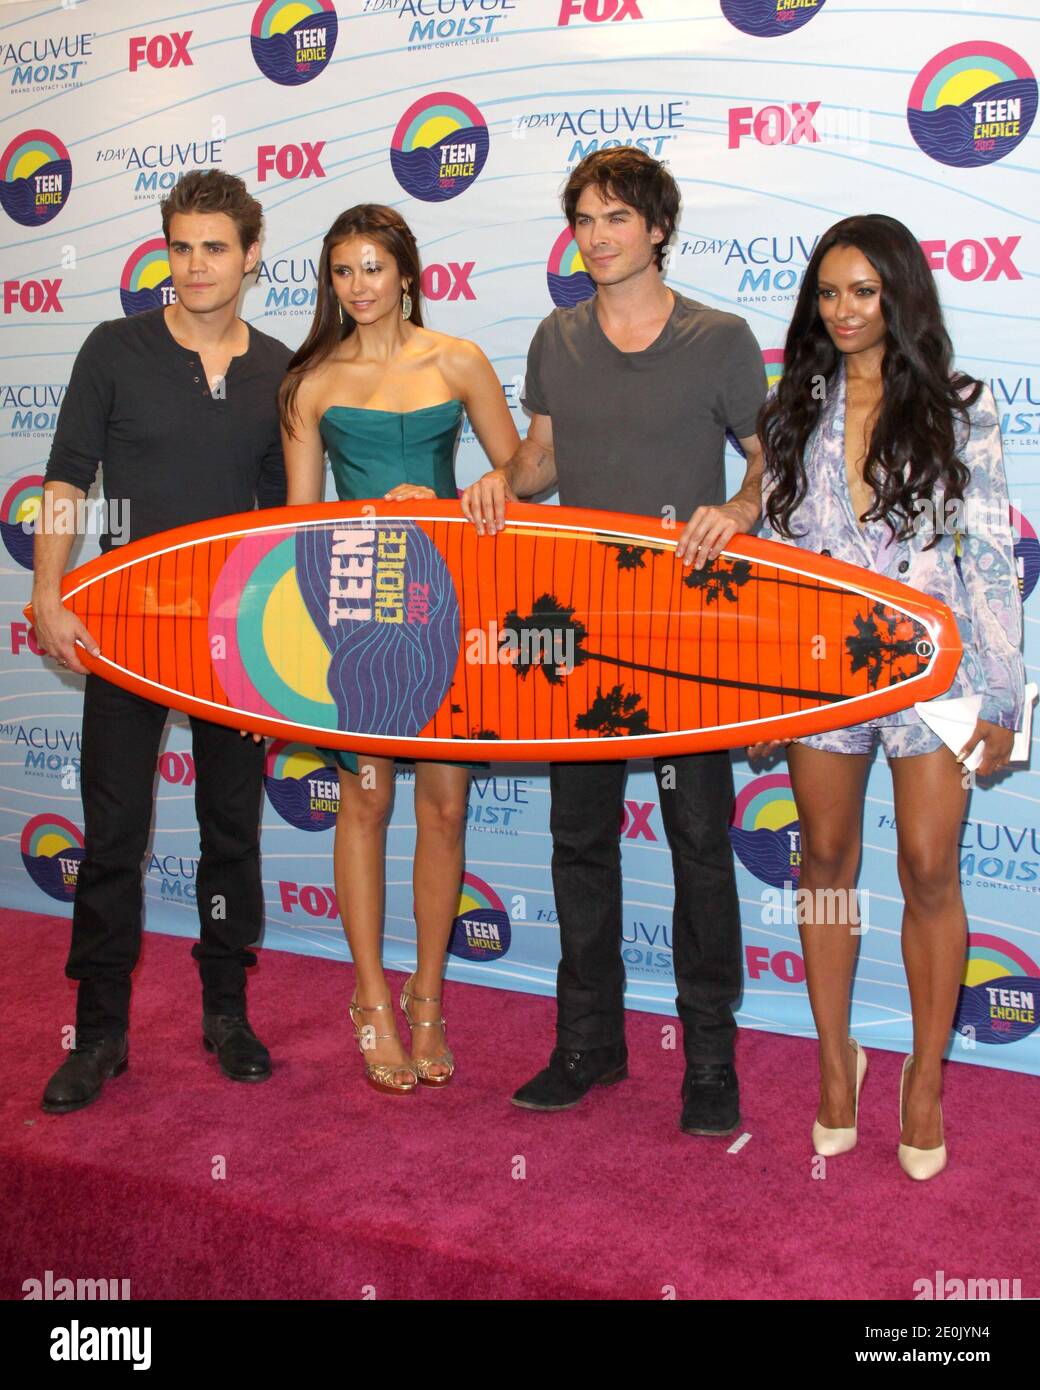 Socialist Kommerciel Veluddannet Paul Wesley, Nina Dobrev, Ian Somerhalder, and Kat Graham attending the  2012 'Teen Choice Awards' held at the Gibson Amphitheatre in Universal  City, CA, USA, on July 22, 2012. Photo by Tony